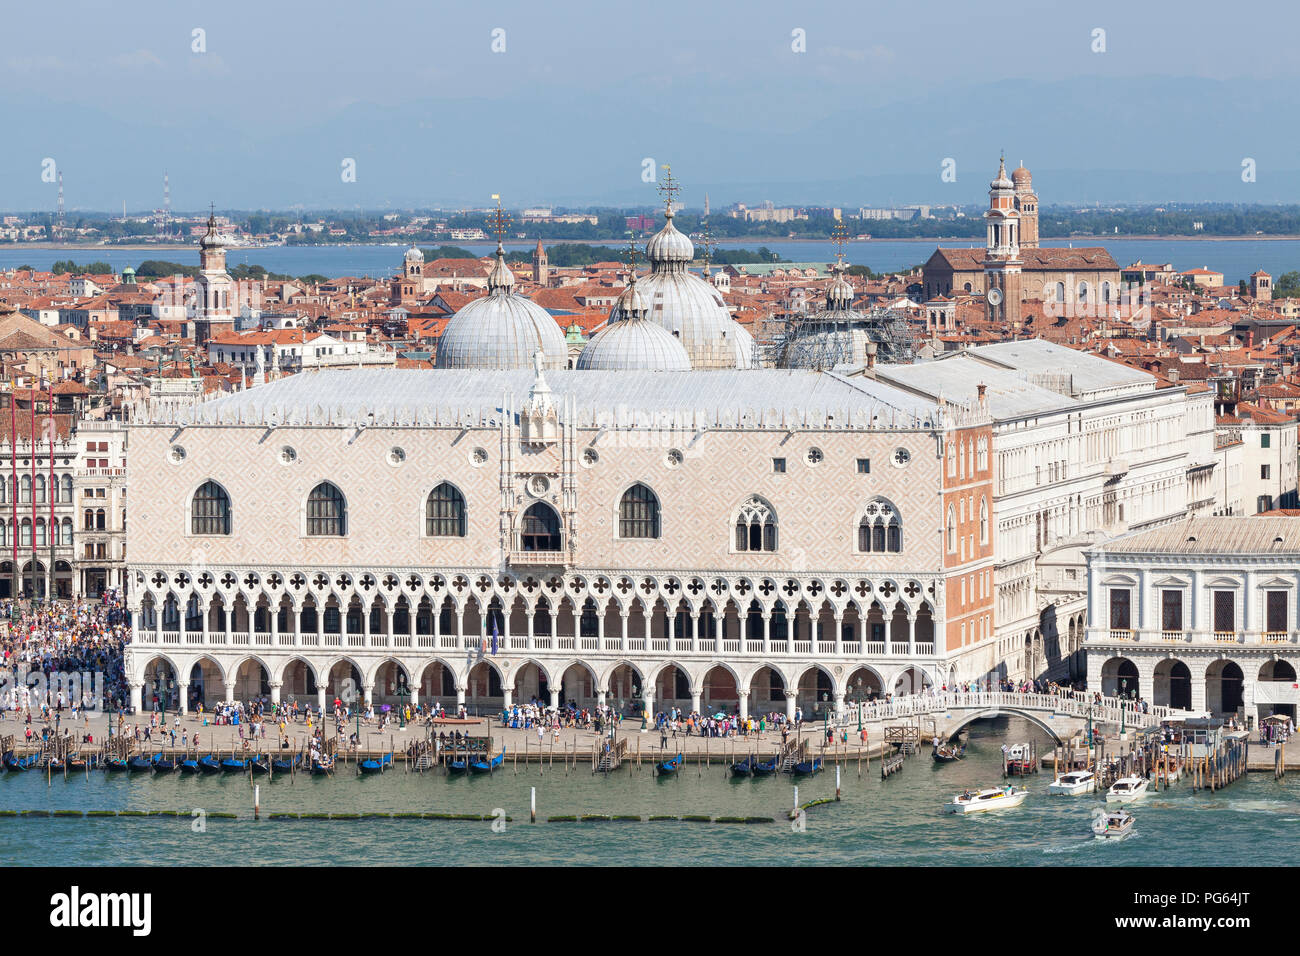 Aerial view of the exterior facade of Doges Palace,  Palazzo Ducale, Ducal Palace, San Marco, Venice, Veneto, Italy with a view to the mainland and Me Stock Photo